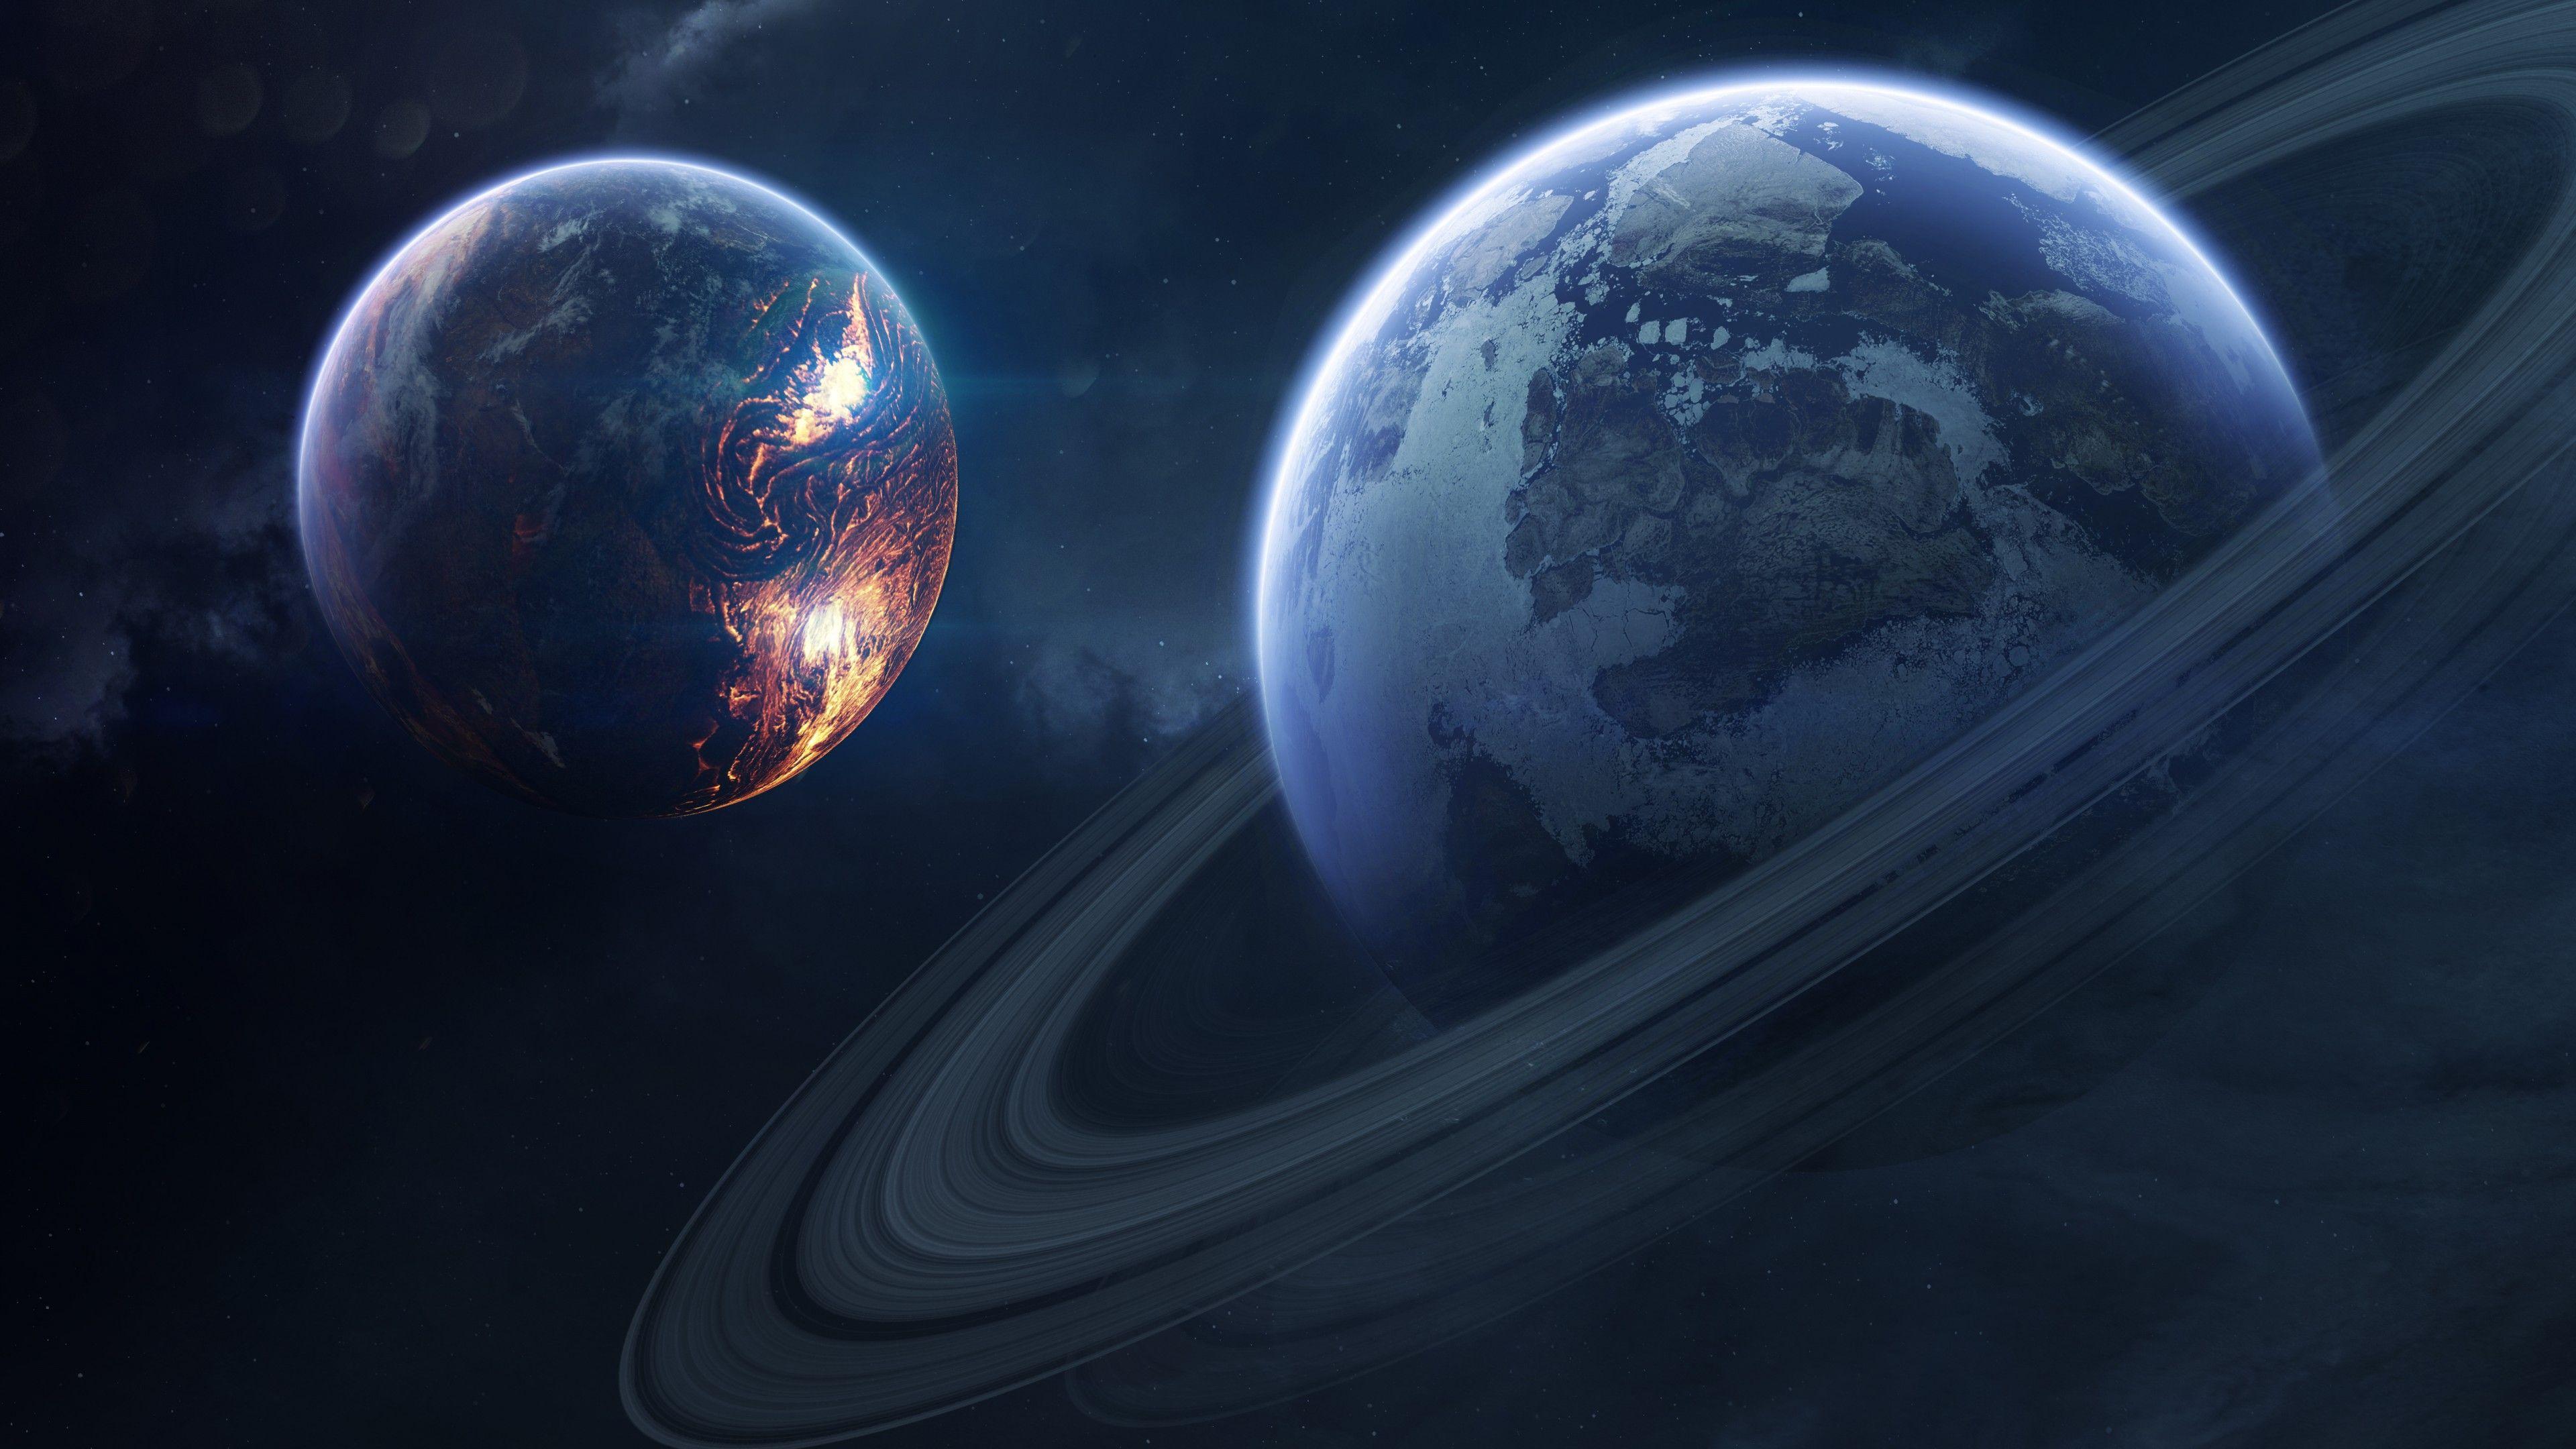 Planets 4k Wallpapers Top Free Planets 4k Backgrounds Wallpaperaccess 6368